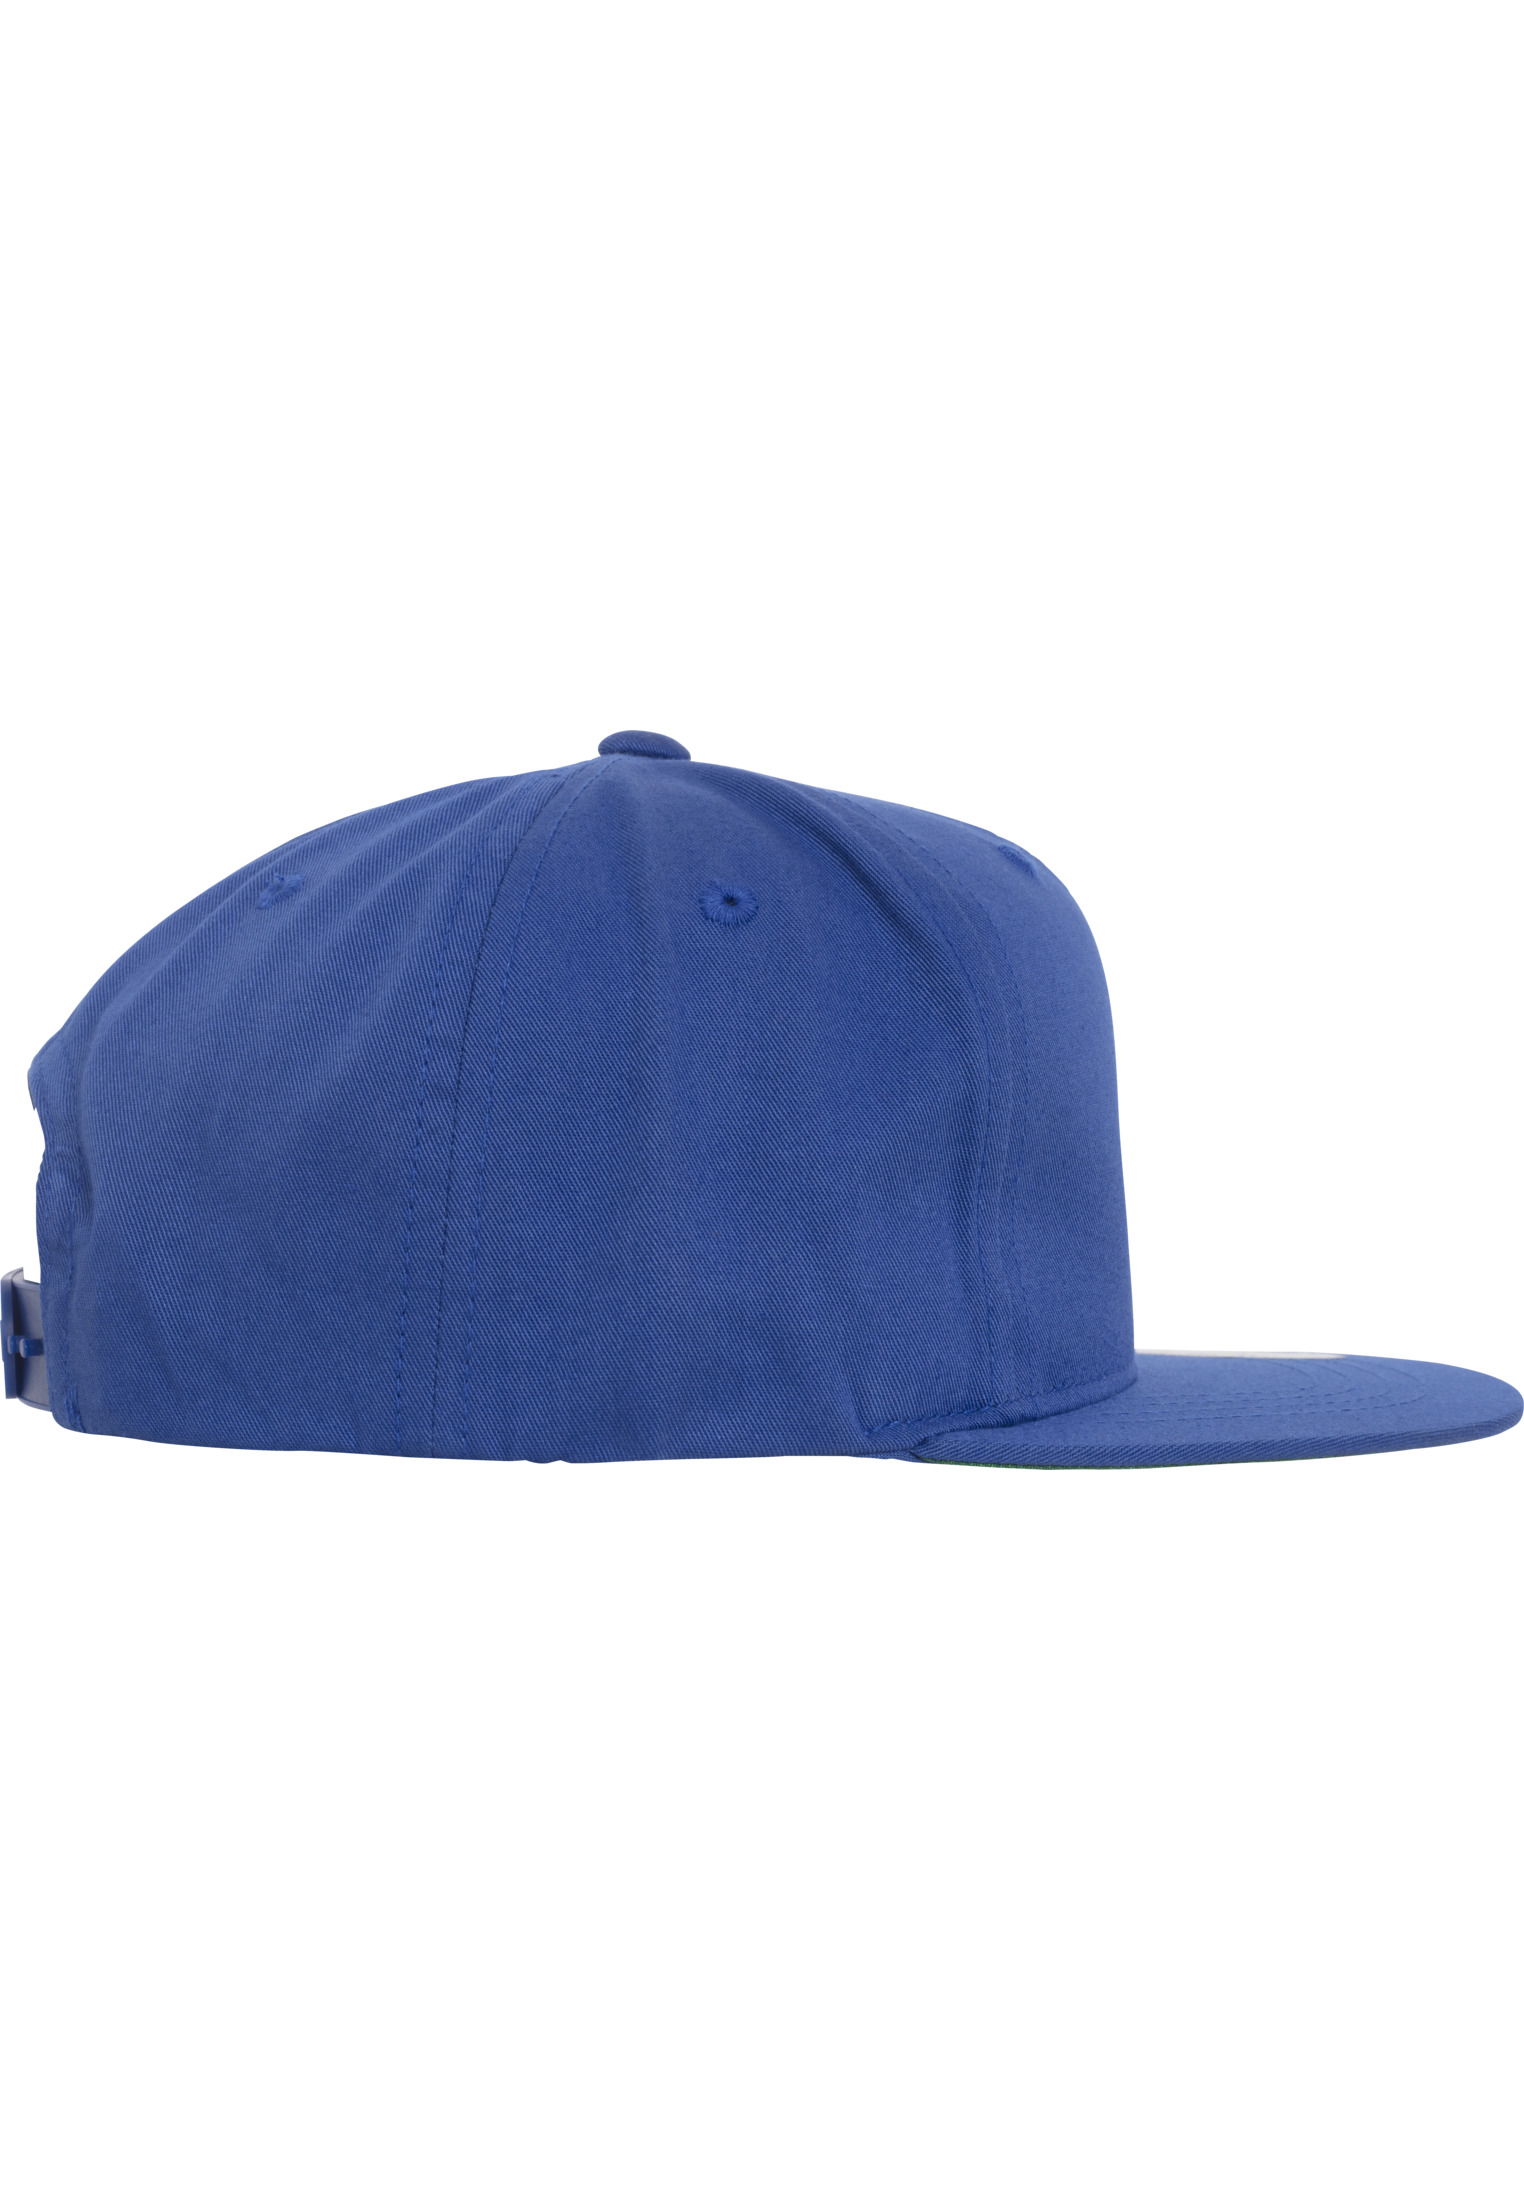 Kids Pro-Style Twill Snapback Youth Cap in Farbe royal